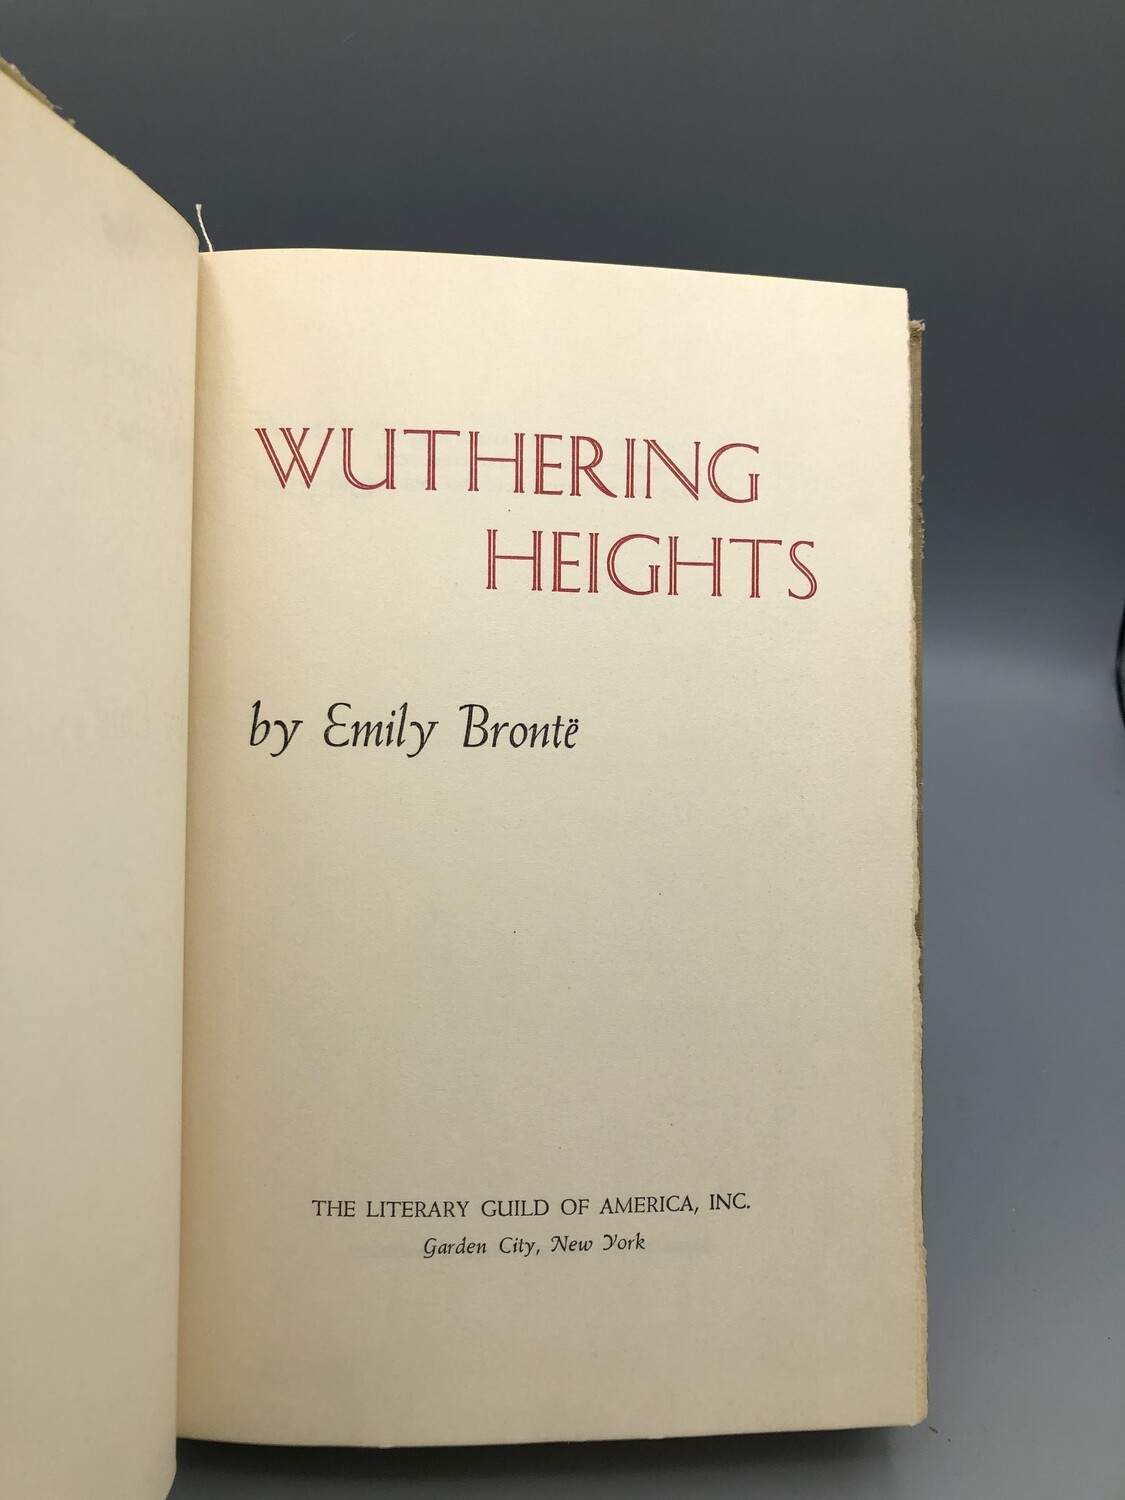 Wuthering Heights Book c 1930